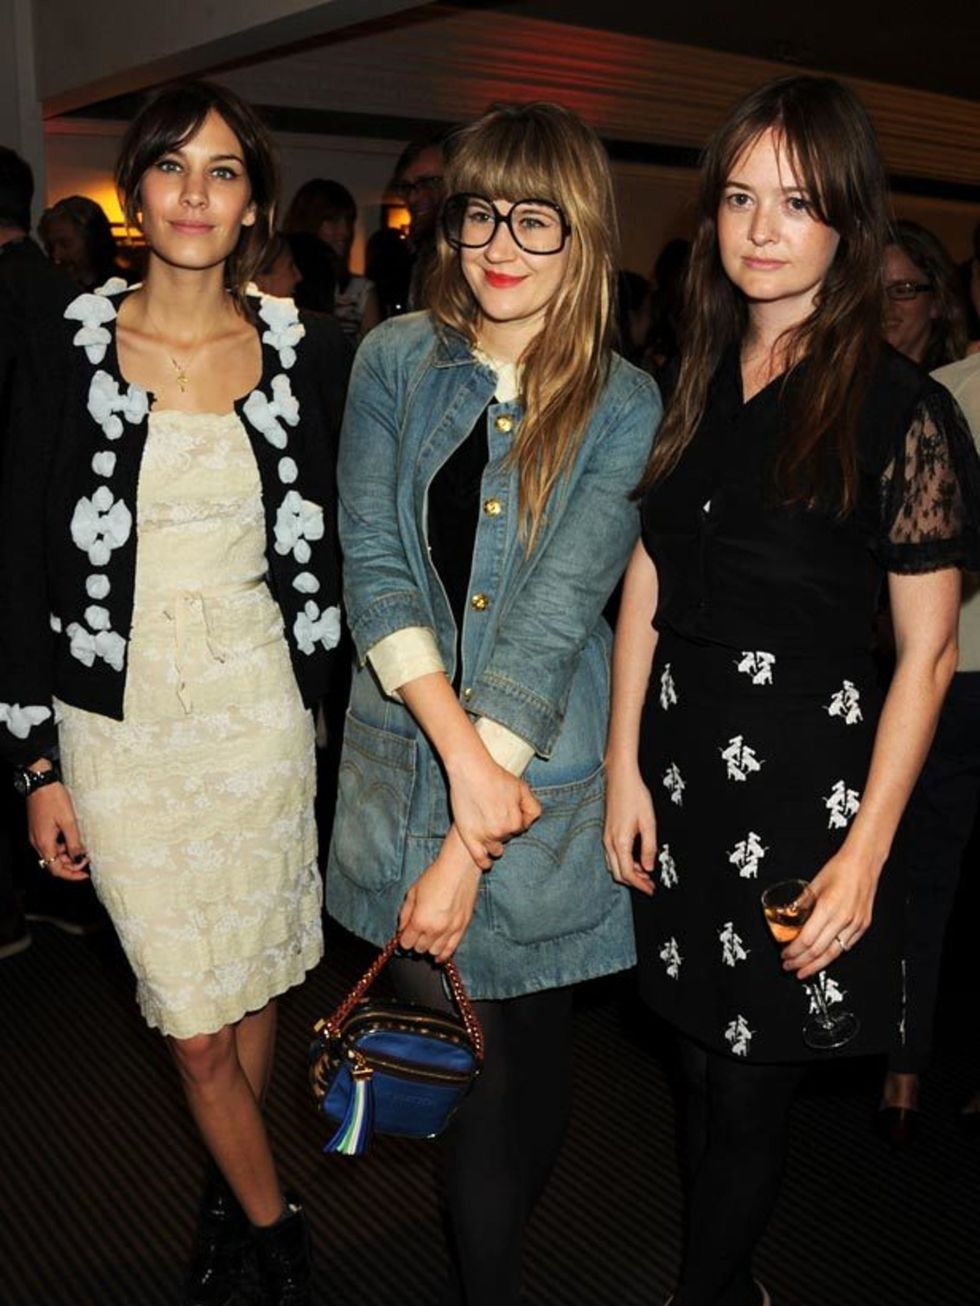 <p><a href="http://www.elleuk.com/starstyle/style-files/%28section%29/Alexa-Chung">Alexa Chung</a> and Tennessee Thomas</p>